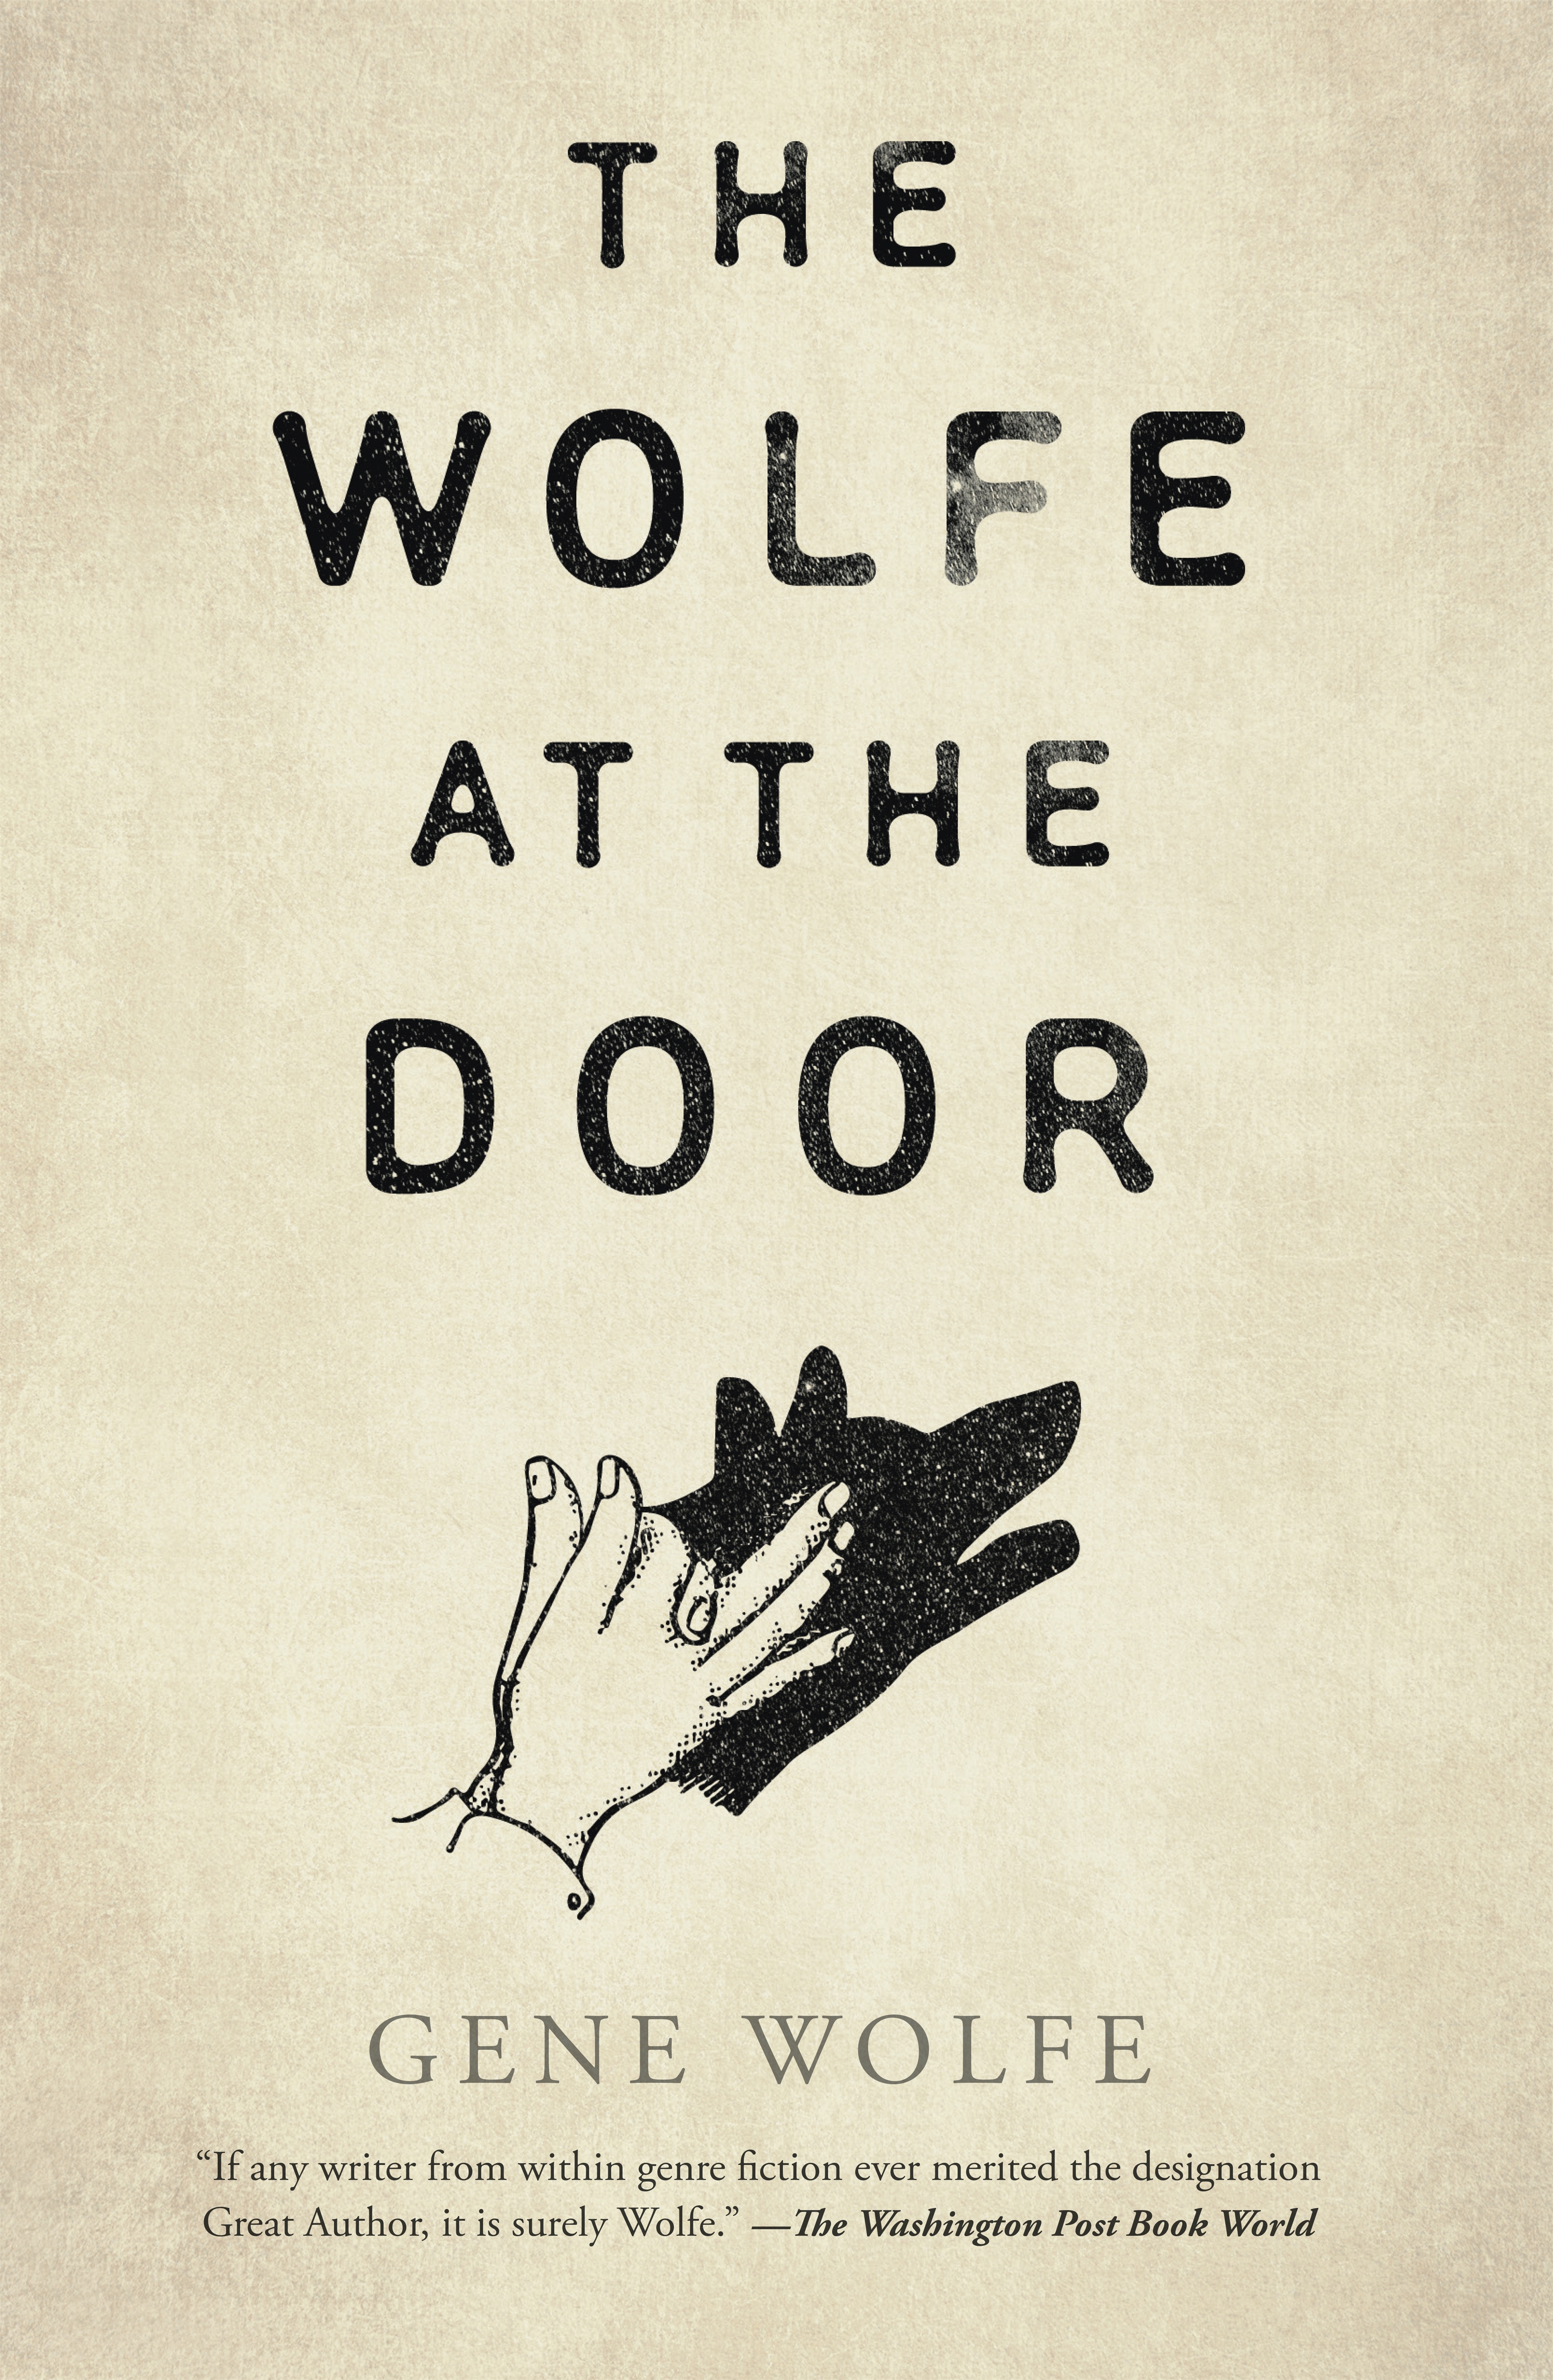 The Wolfe at the Door by Gene Wolfe